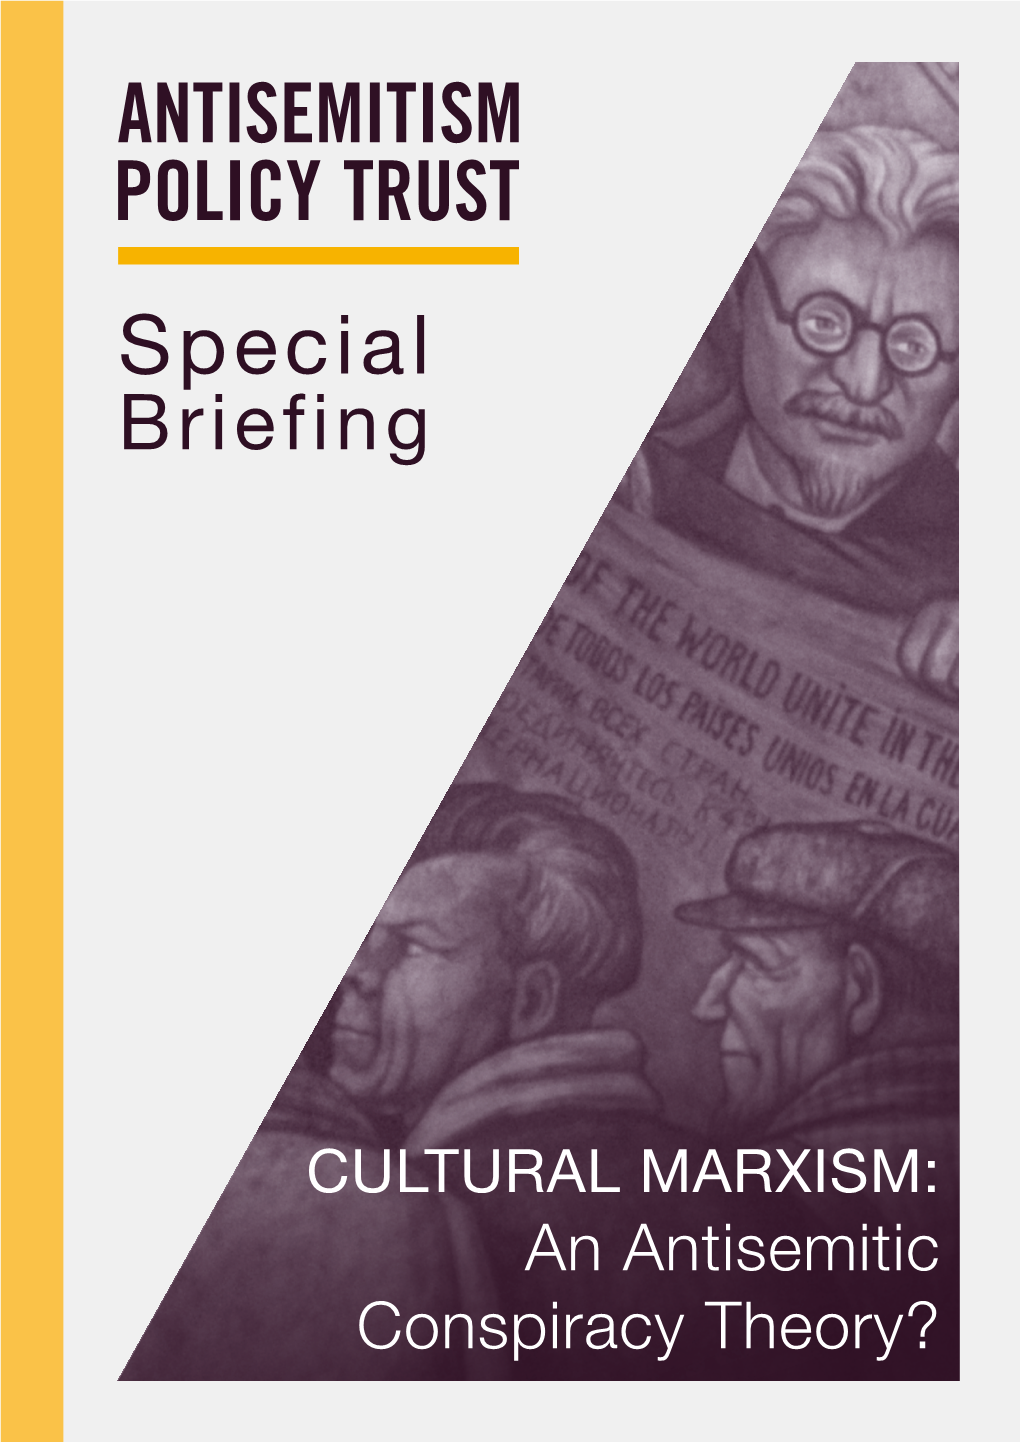 CULTURAL MARXISM: an Antisemitic Conspiracy Theory? Special Briefing: Cultural Marxism: an Antisemitic Conspiracy Theory?